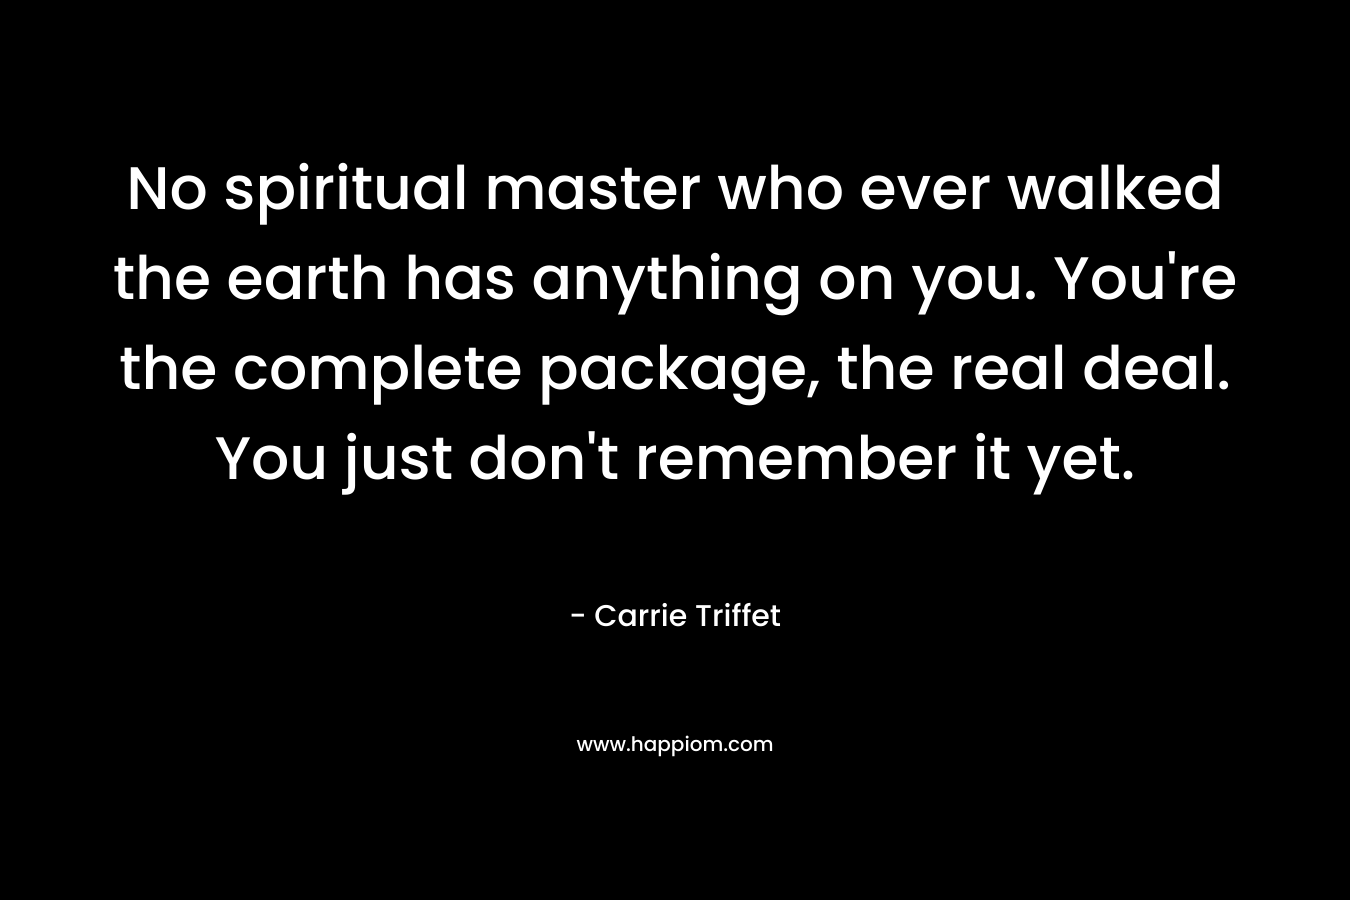 No spiritual master who ever walked the earth has anything on you. You’re the complete package, the real deal. You just don’t remember it yet. – Carrie Triffet